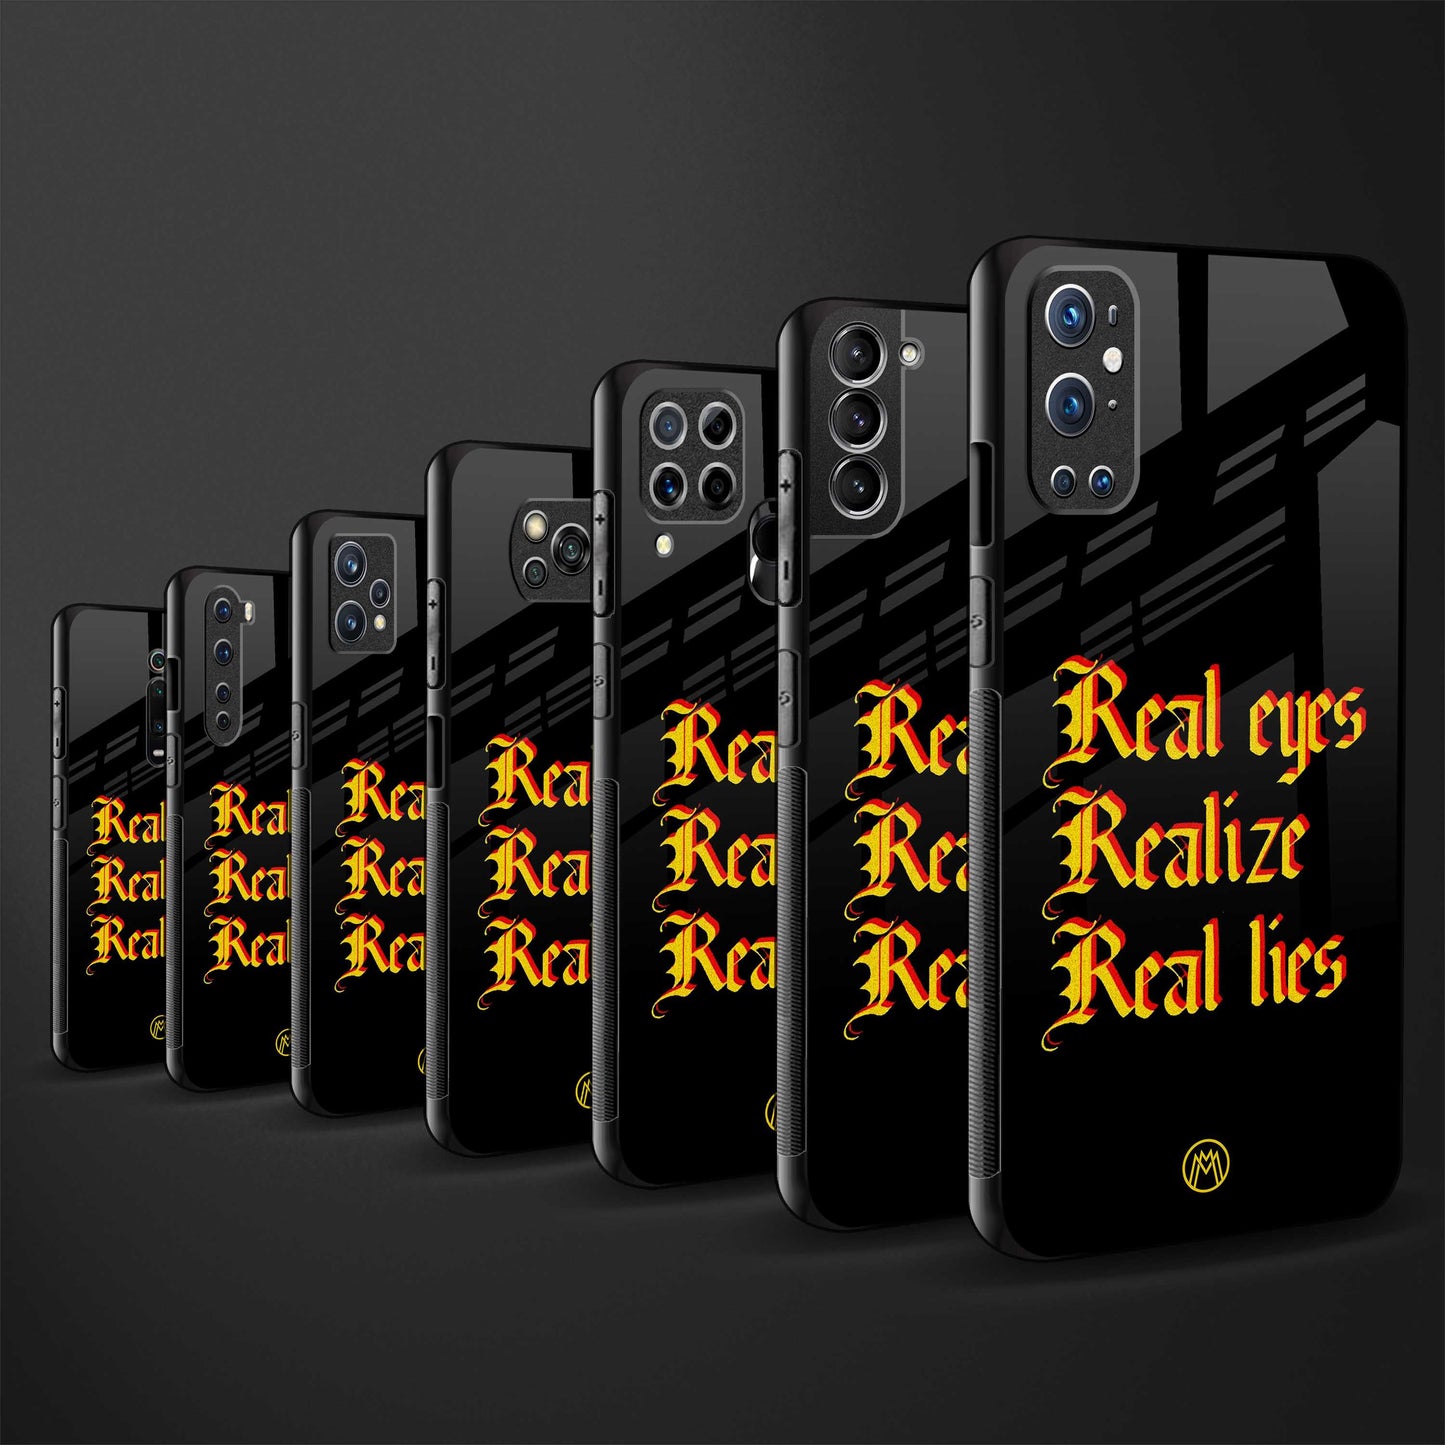 real eyes realize real lies quote glass case for realme 6 pro image-3